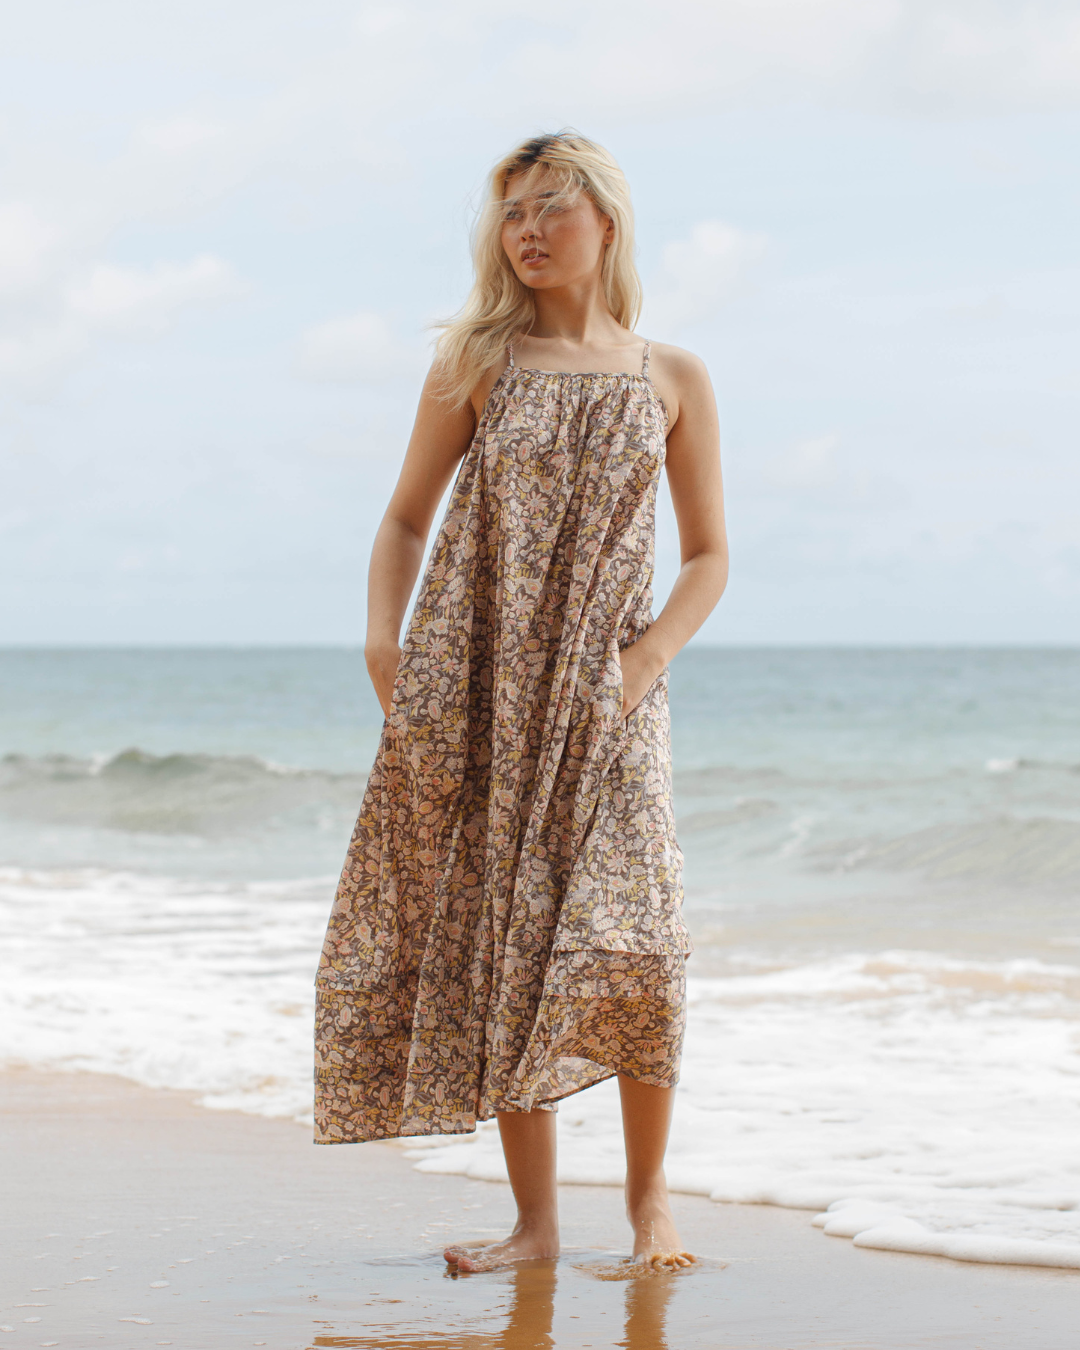 Pleated A-Line Maxi Tank Dress in Paisley